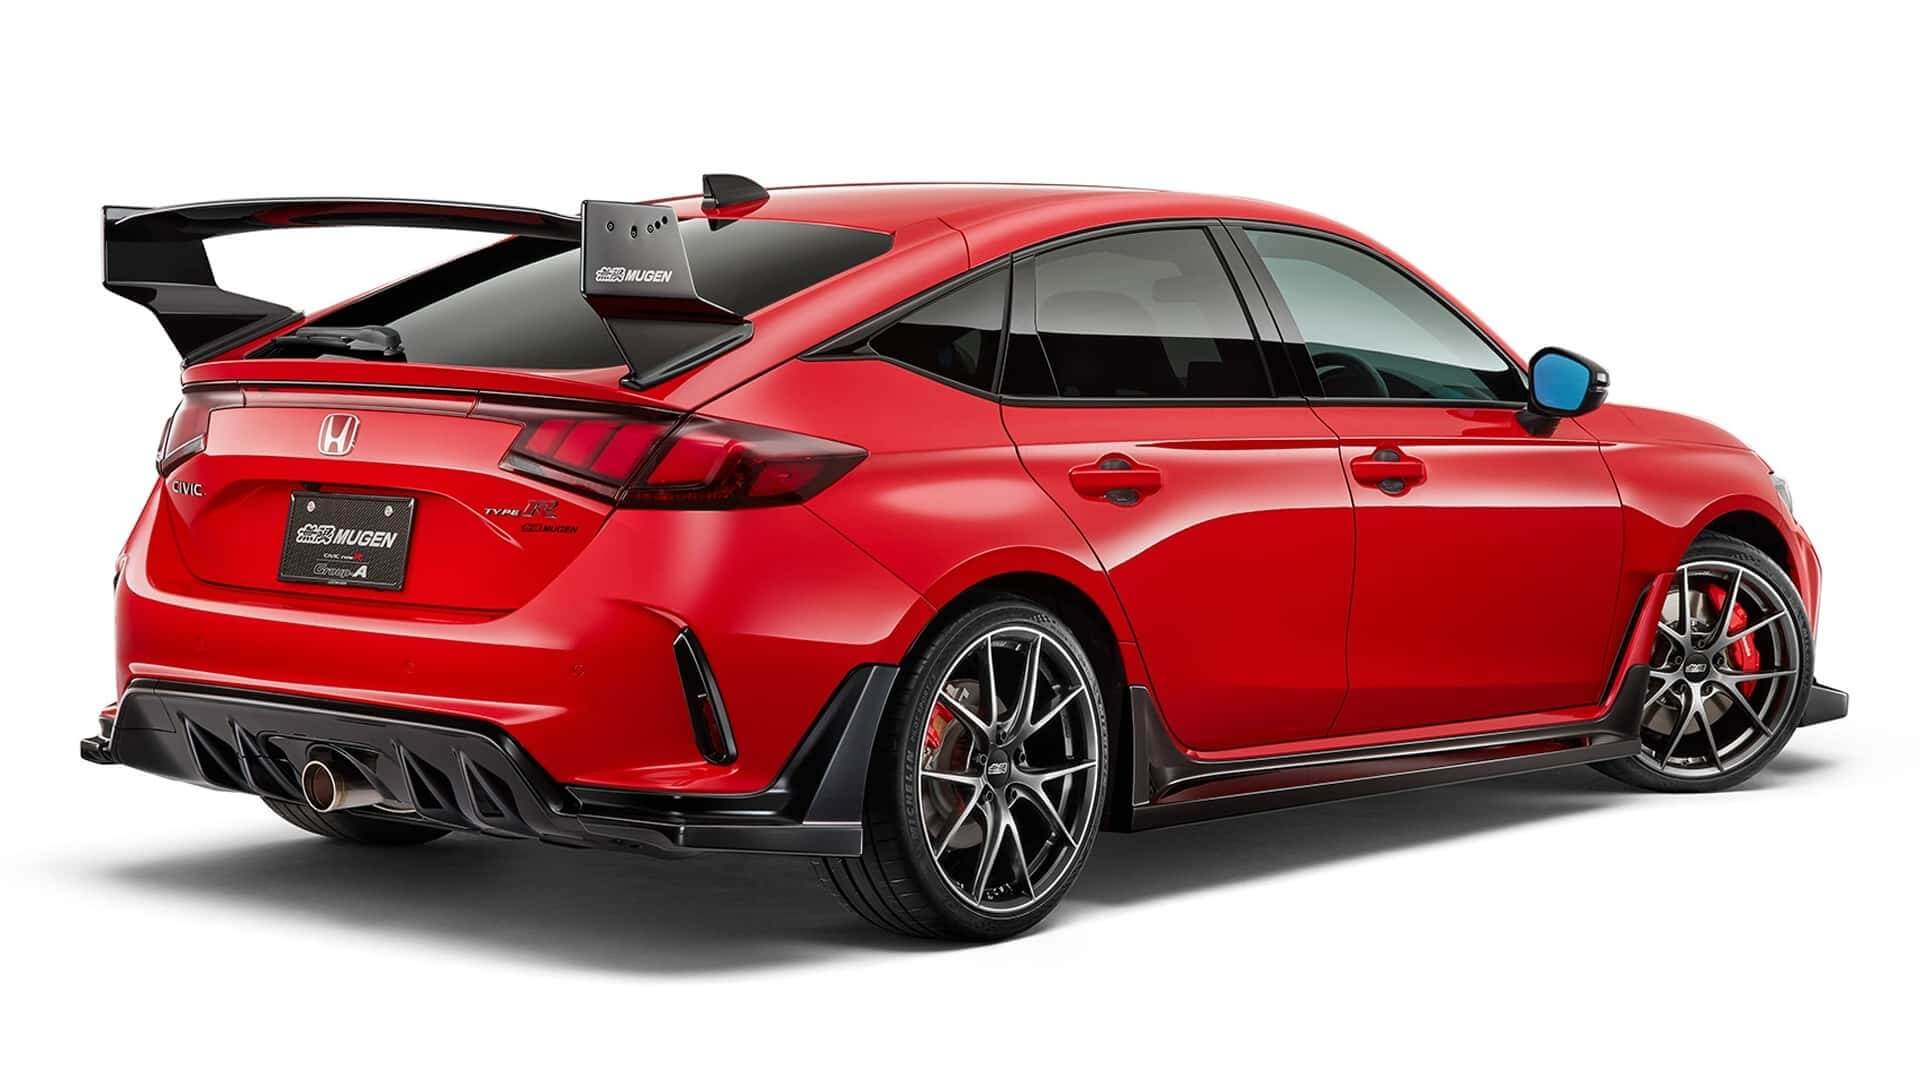 Atelier Mugen has developed a new tuning kit for the Honda Civic Type R hatchback